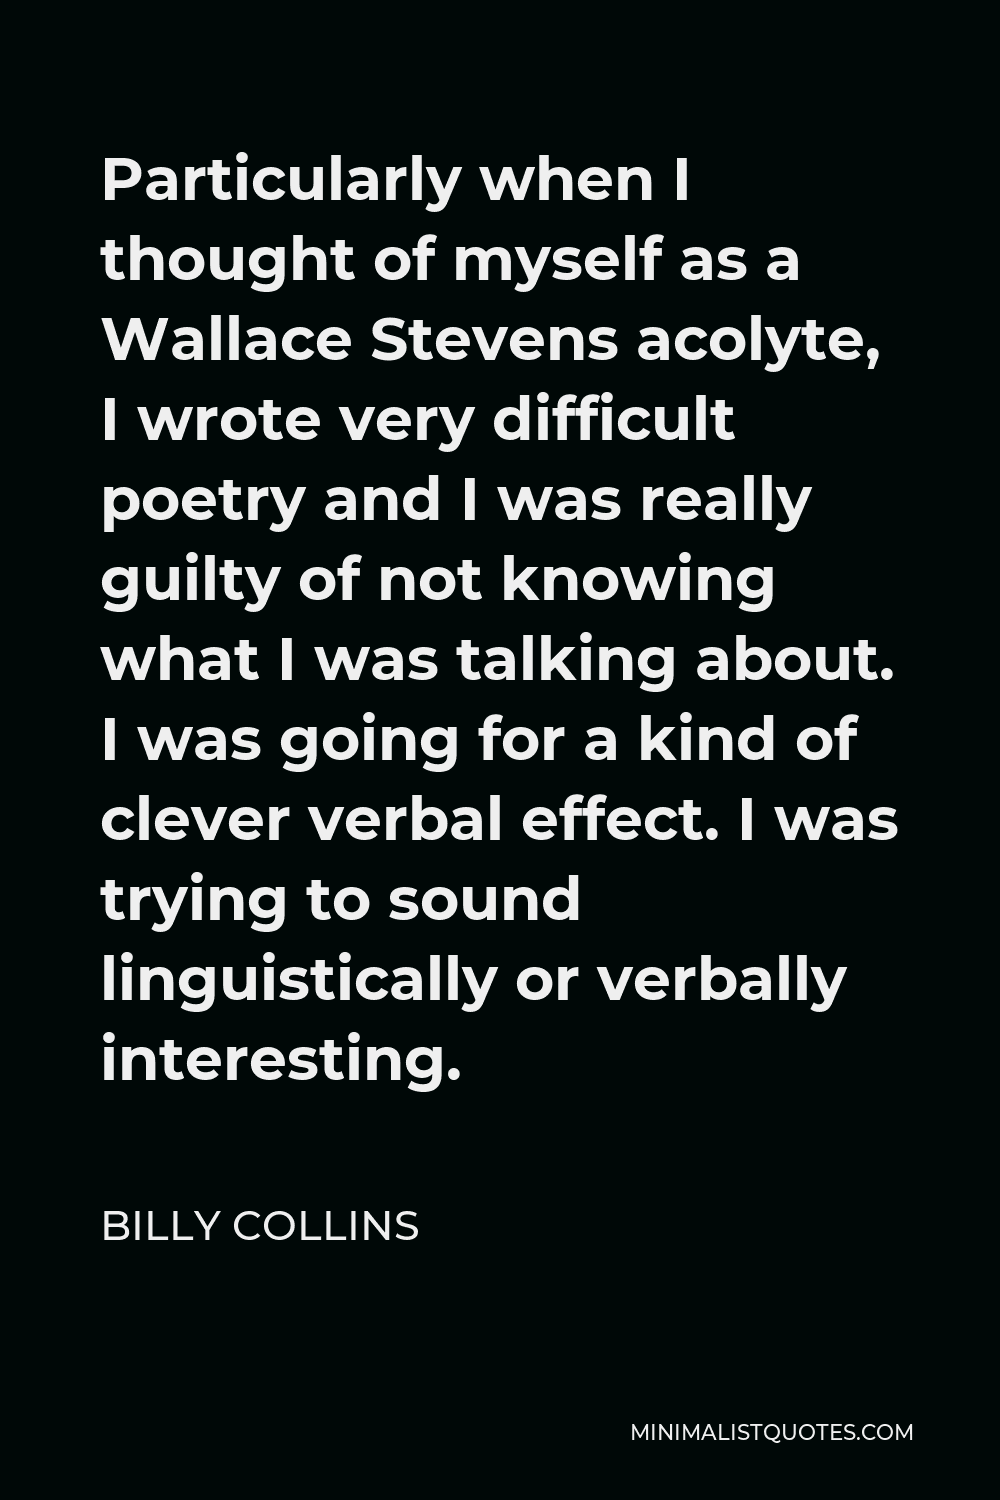 Billy Collins Quote - Particularly when I thought of myself as a Wallace Stevens acolyte, I wrote very difficult poetry and I was really guilty of not knowing what I was talking about. I was going for a kind of clever verbal effect. I was trying to sound linguistically or verbally interesting.